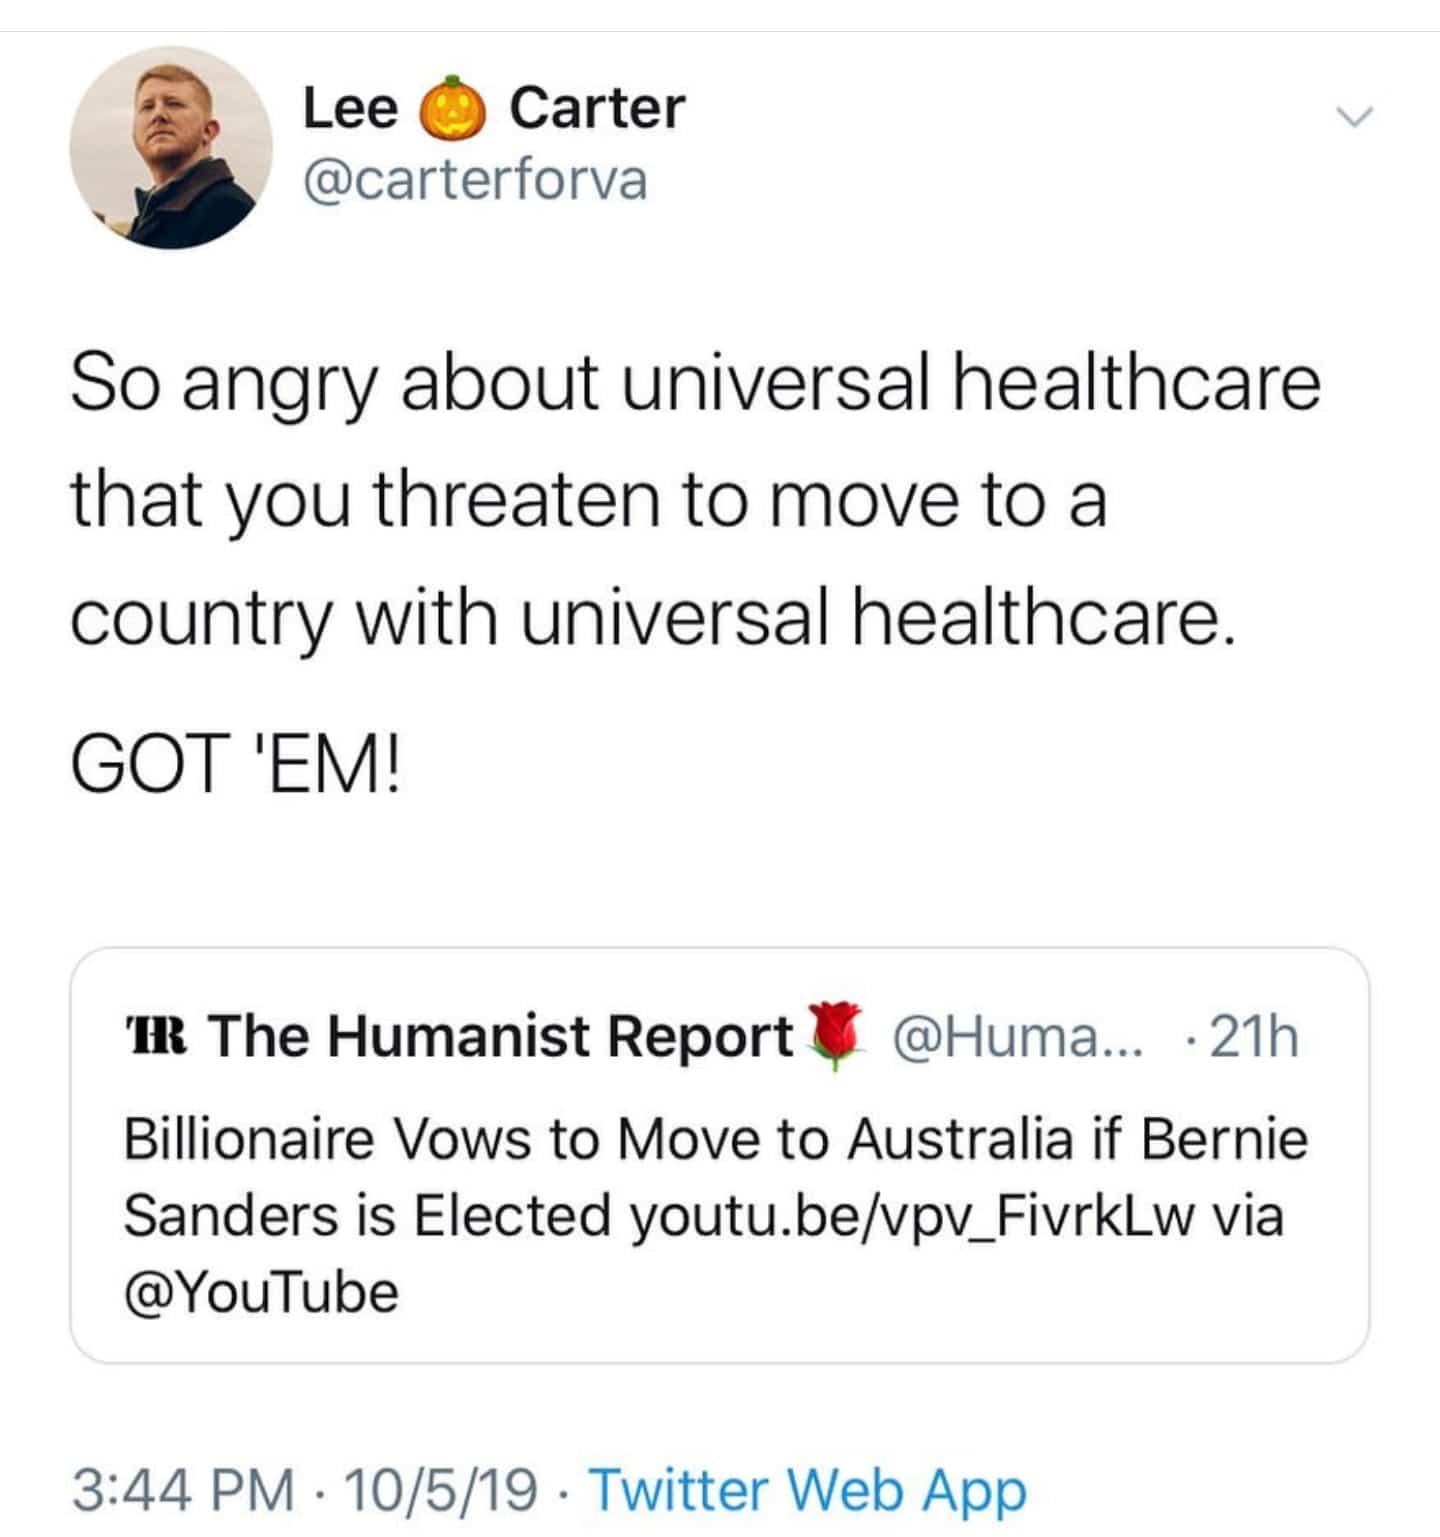 political political-memes political text: Lee Carter @carterforva So angry about universal healthcare that you threaten to move to a country with universal healthcare. GOT 'EM! 'IR The Humanist Report @Huma... •21h Billionaire Vows to Move to Australia if Bernie Sanders is Elected youtu.be/vpv_FivrkLw via @YouTube 3:44 PM • 10/5/19 • Twitter Web App 